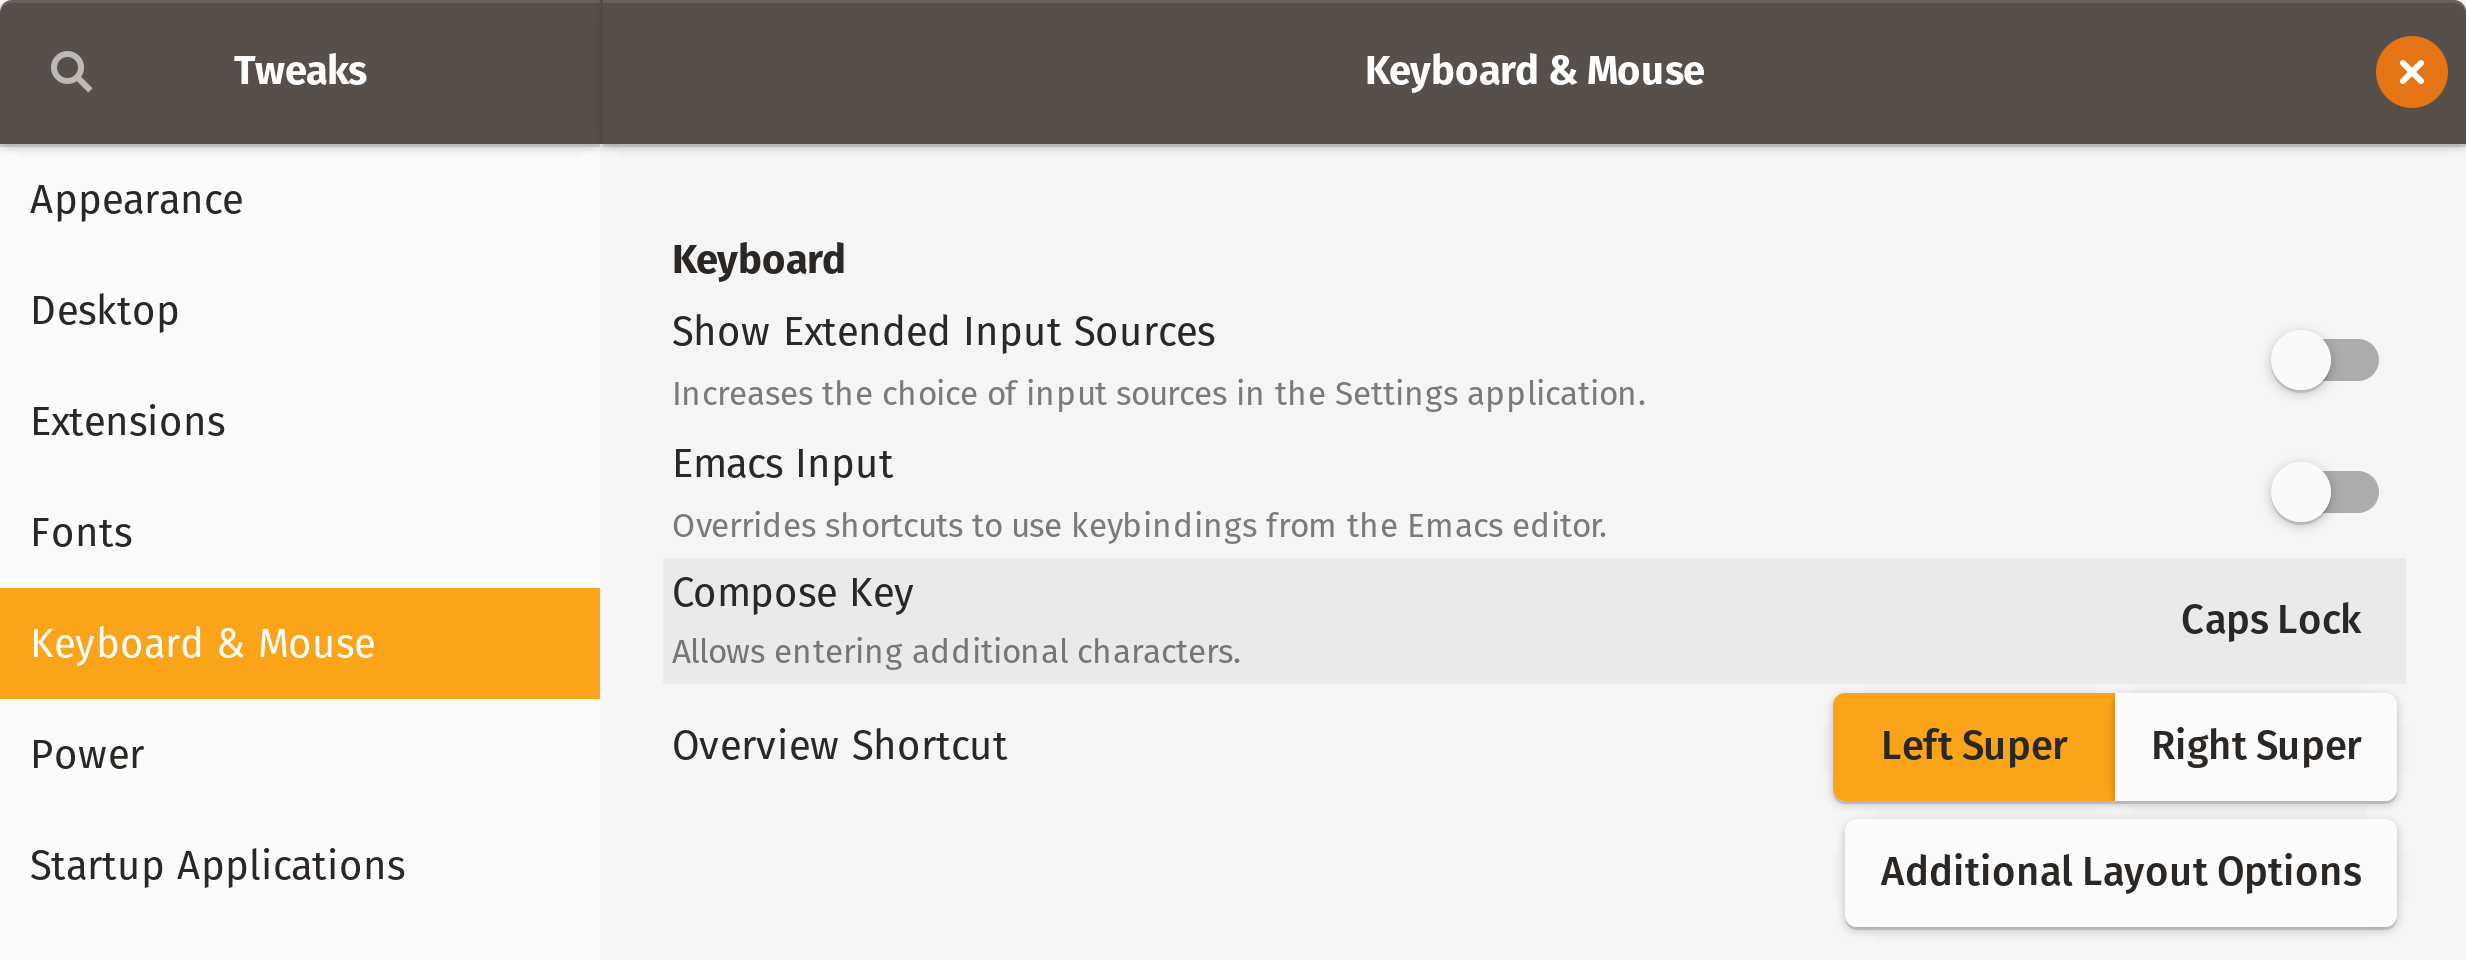 Screenshot of the Gnome Tweaks app, showing the Compose Key setting under the Keyboard &amp; Mouse section